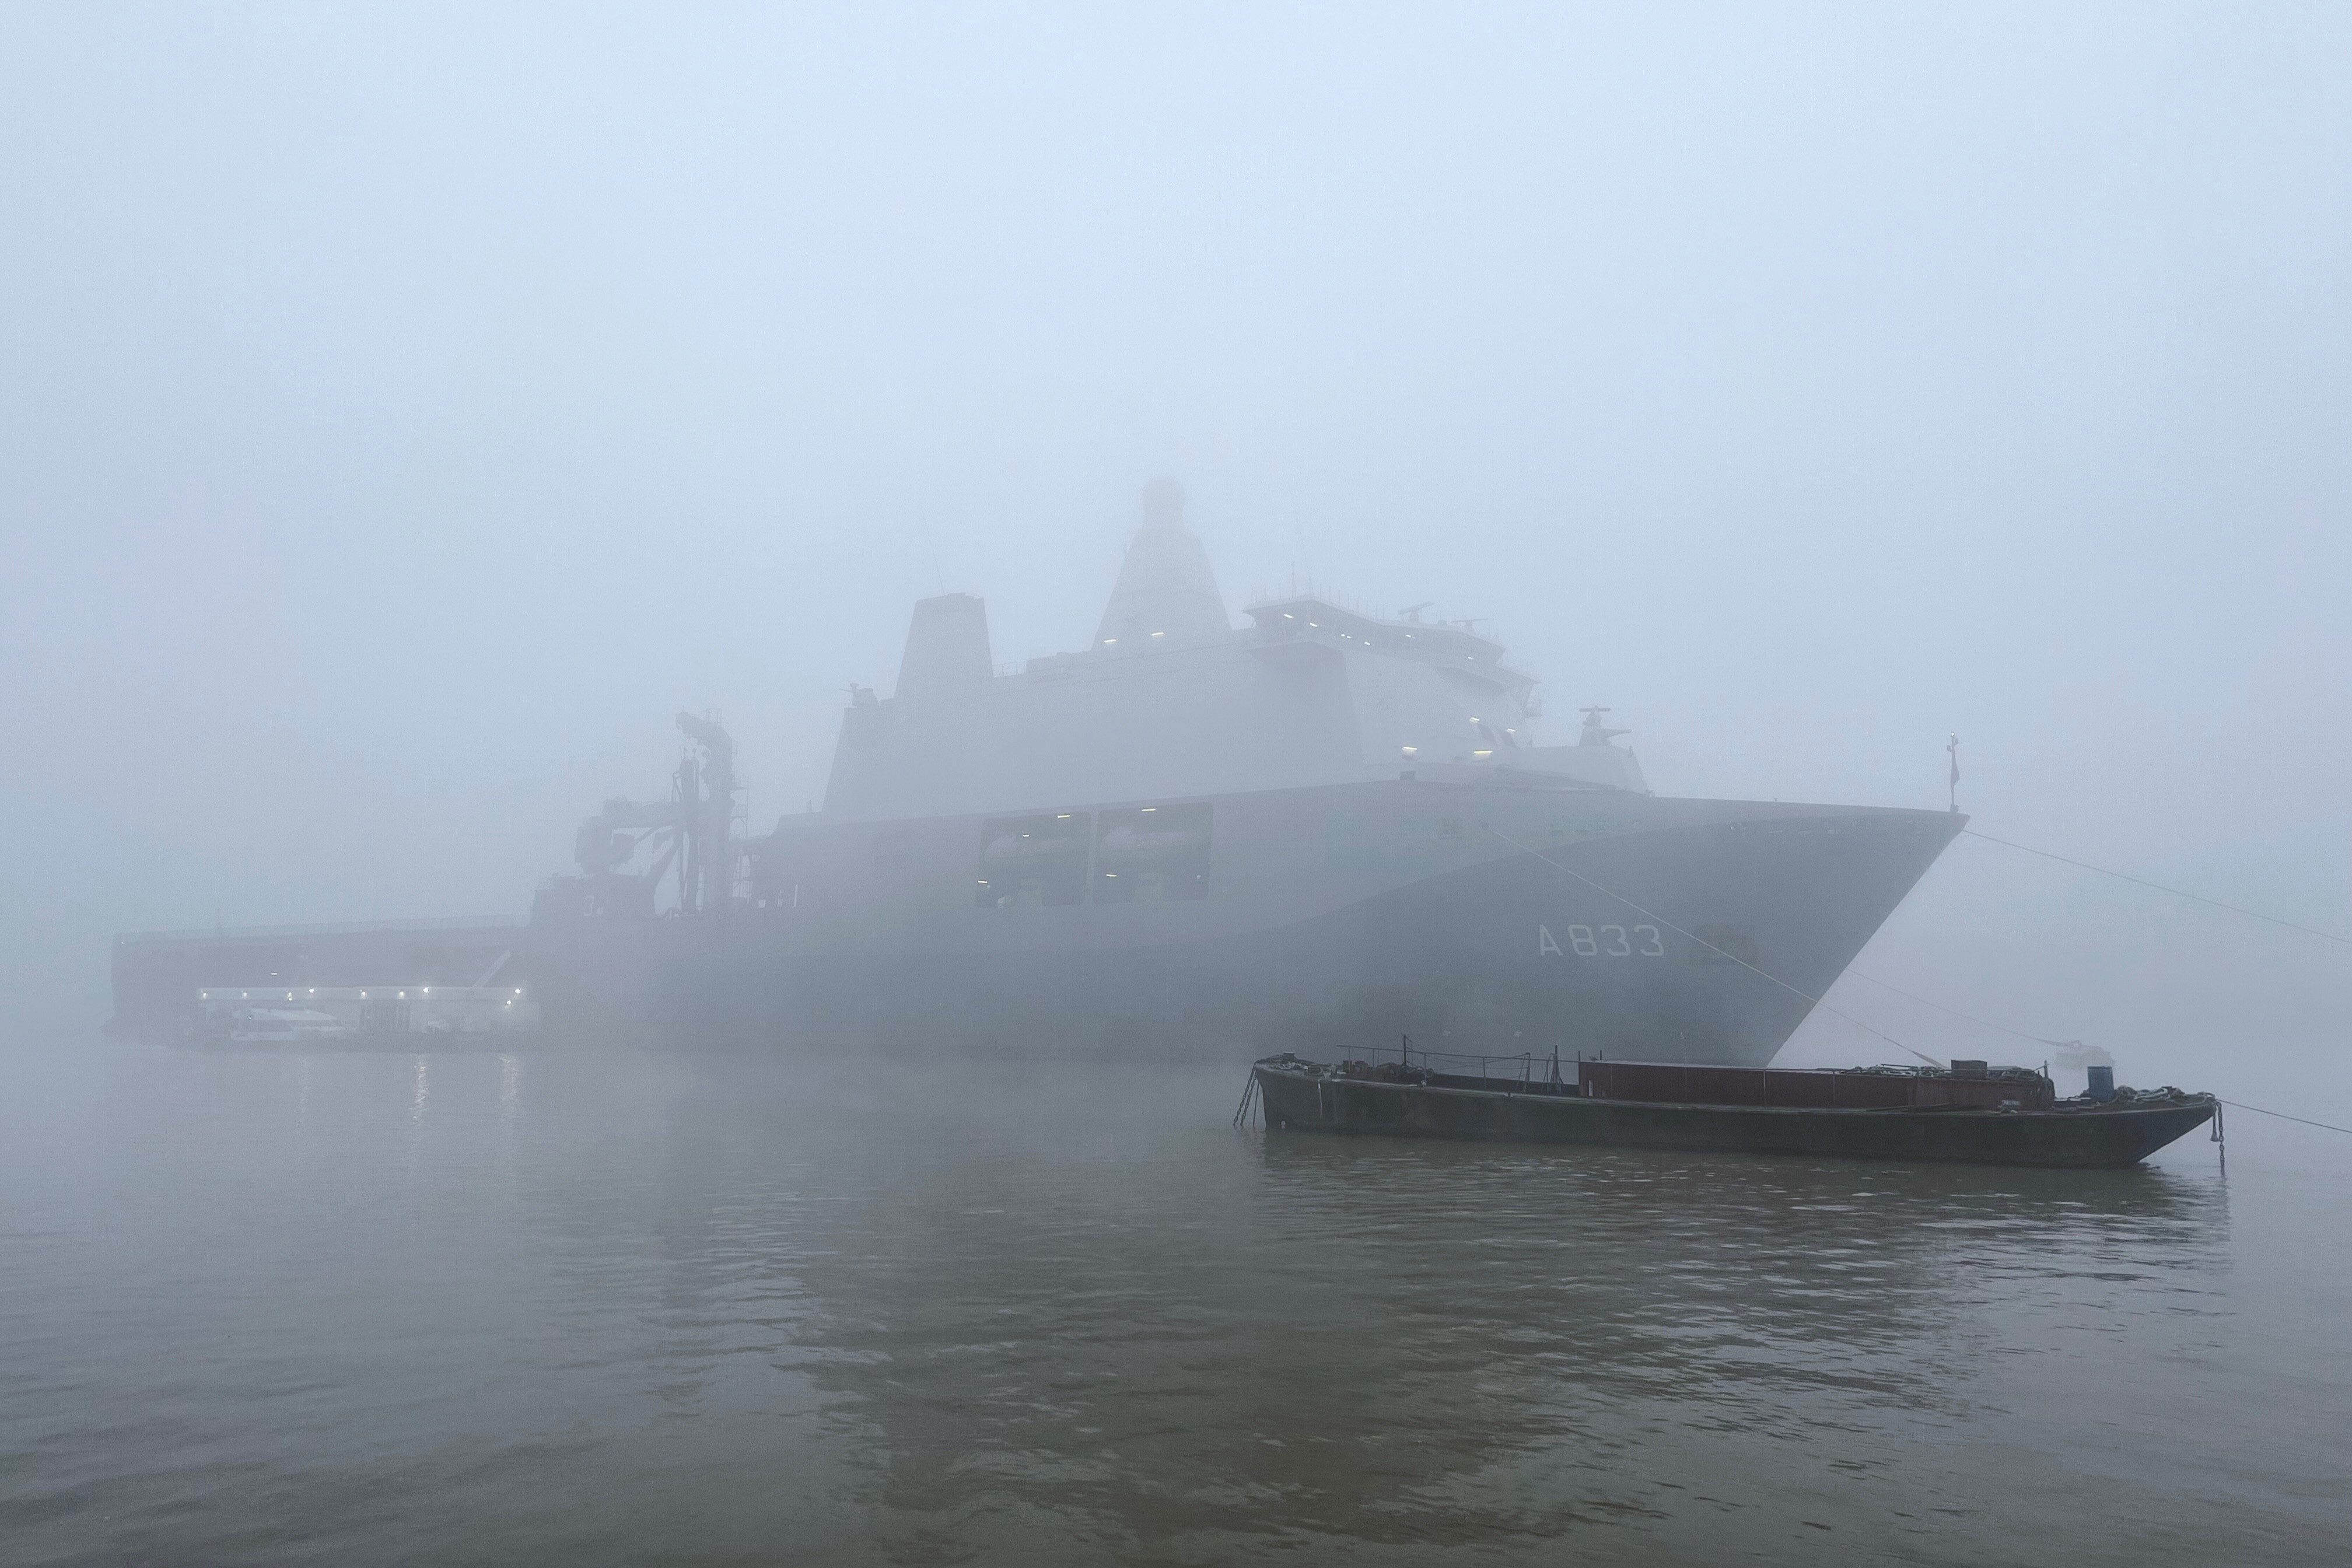 A Dutch Royal Naval vessel, the HNLMS Karel Doorman, moored on the Thames at Greewnwich, in the fog